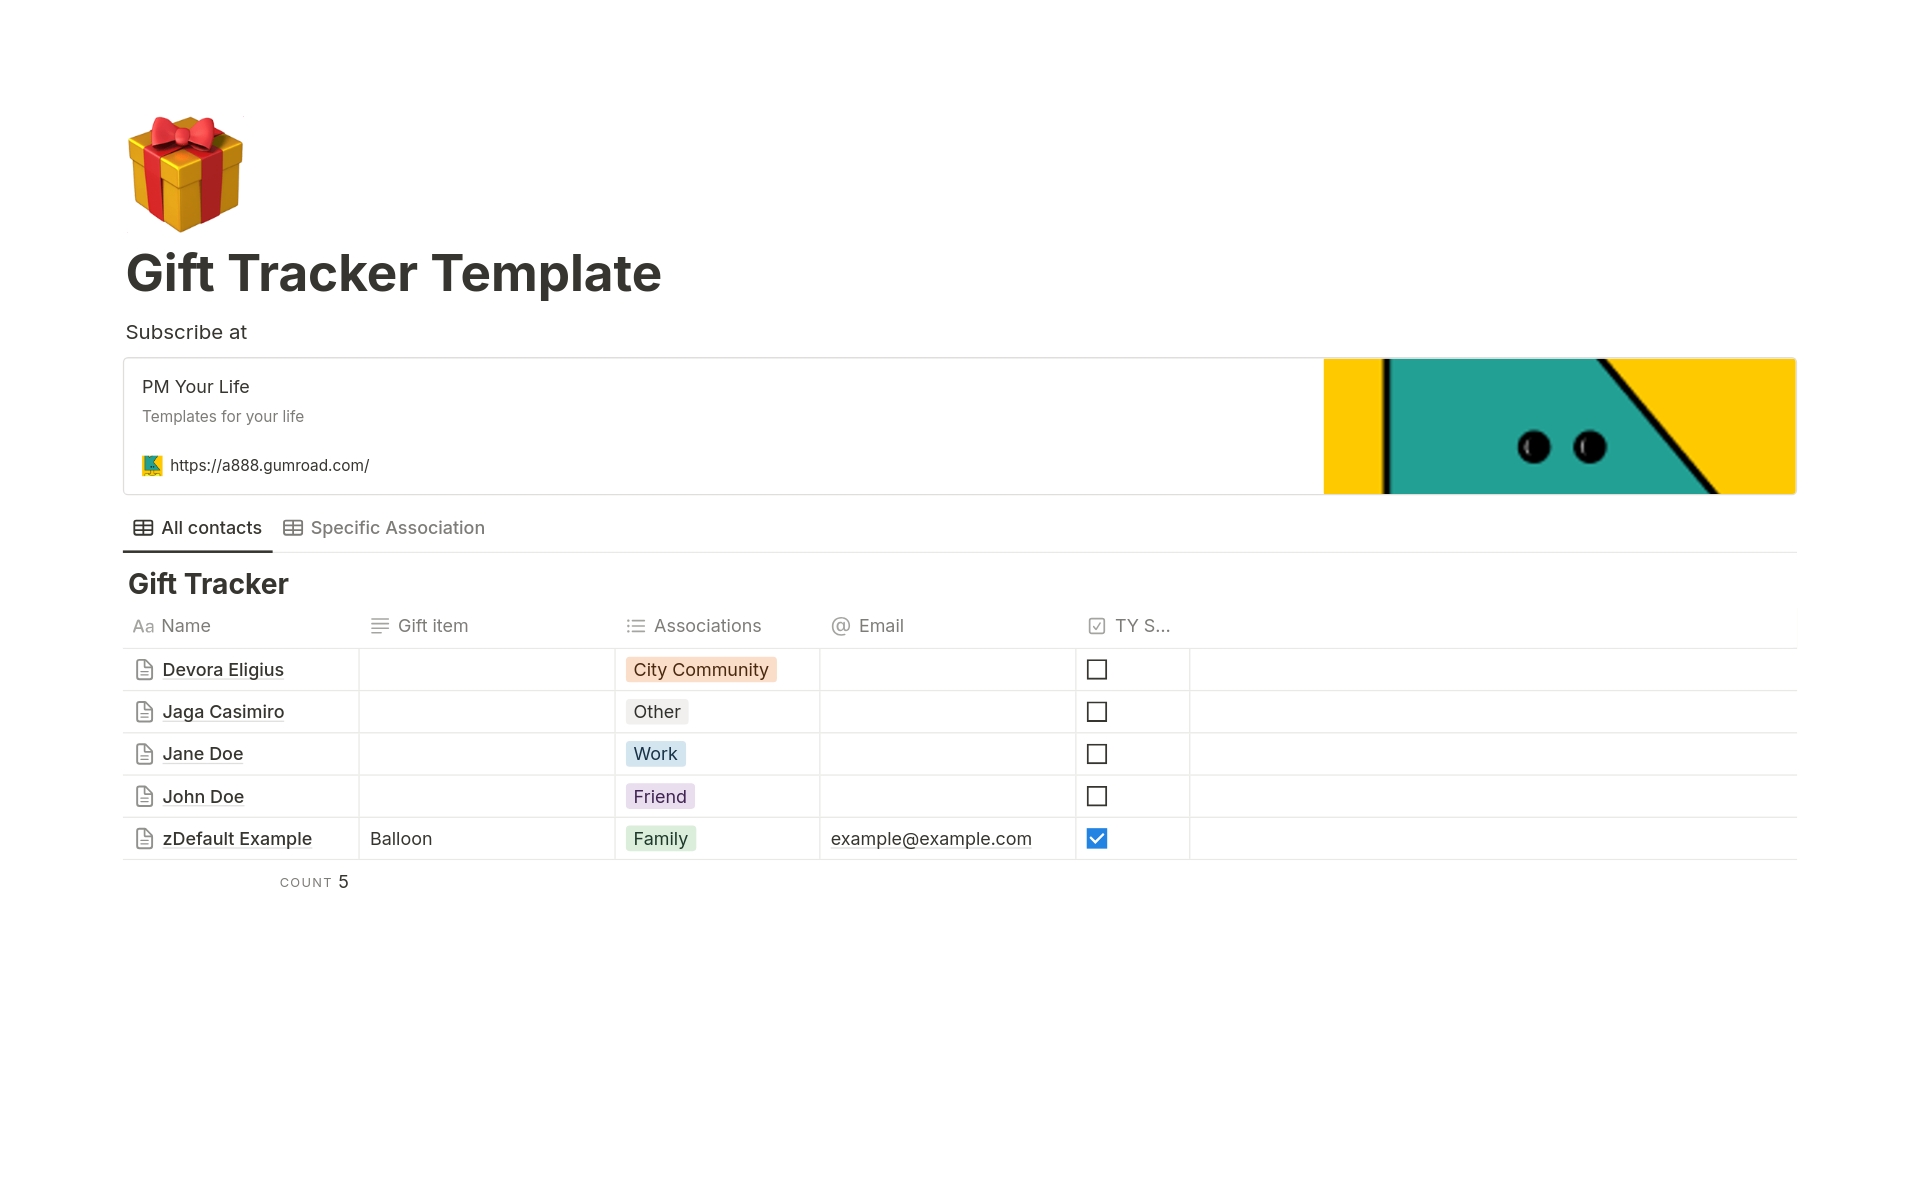 This template provides a simple framework for organizing tasks and projects. With a clean layout, it allows users to track the status of their work effectively. Perfect for personal or team use, this template is designed to help you stay focused and productive.